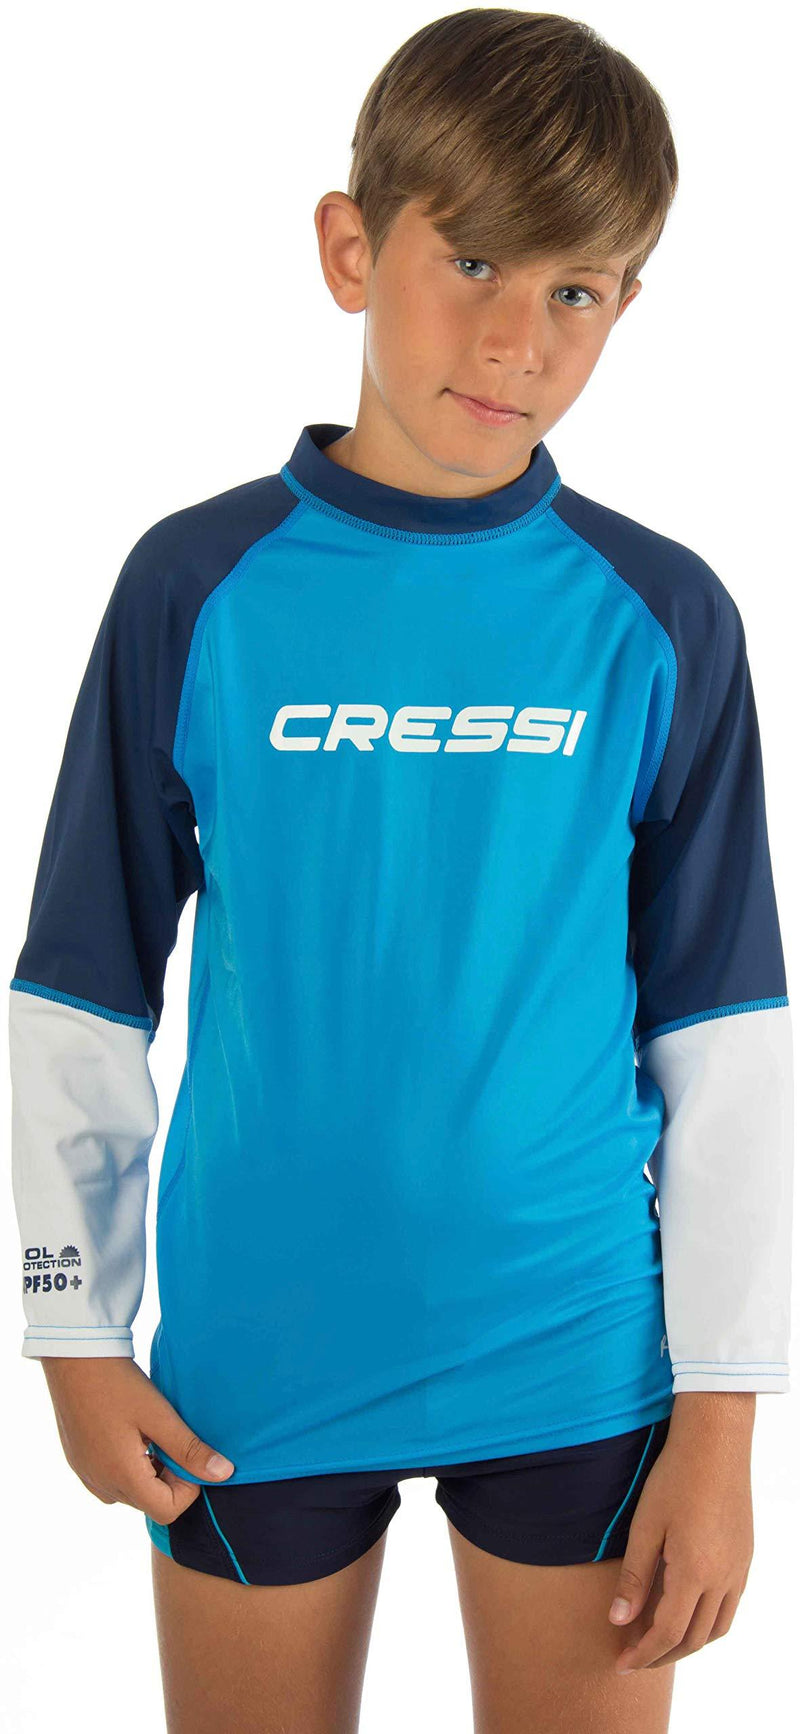 [AUSTRALIA] - Cressi YOUNG LONG SLEEVE RASH GUARD, Boys Girls Rash Guard for Swimming, Surfing, Diving - Cressi: Quality Since 1946 M (10/12 years) Blue 